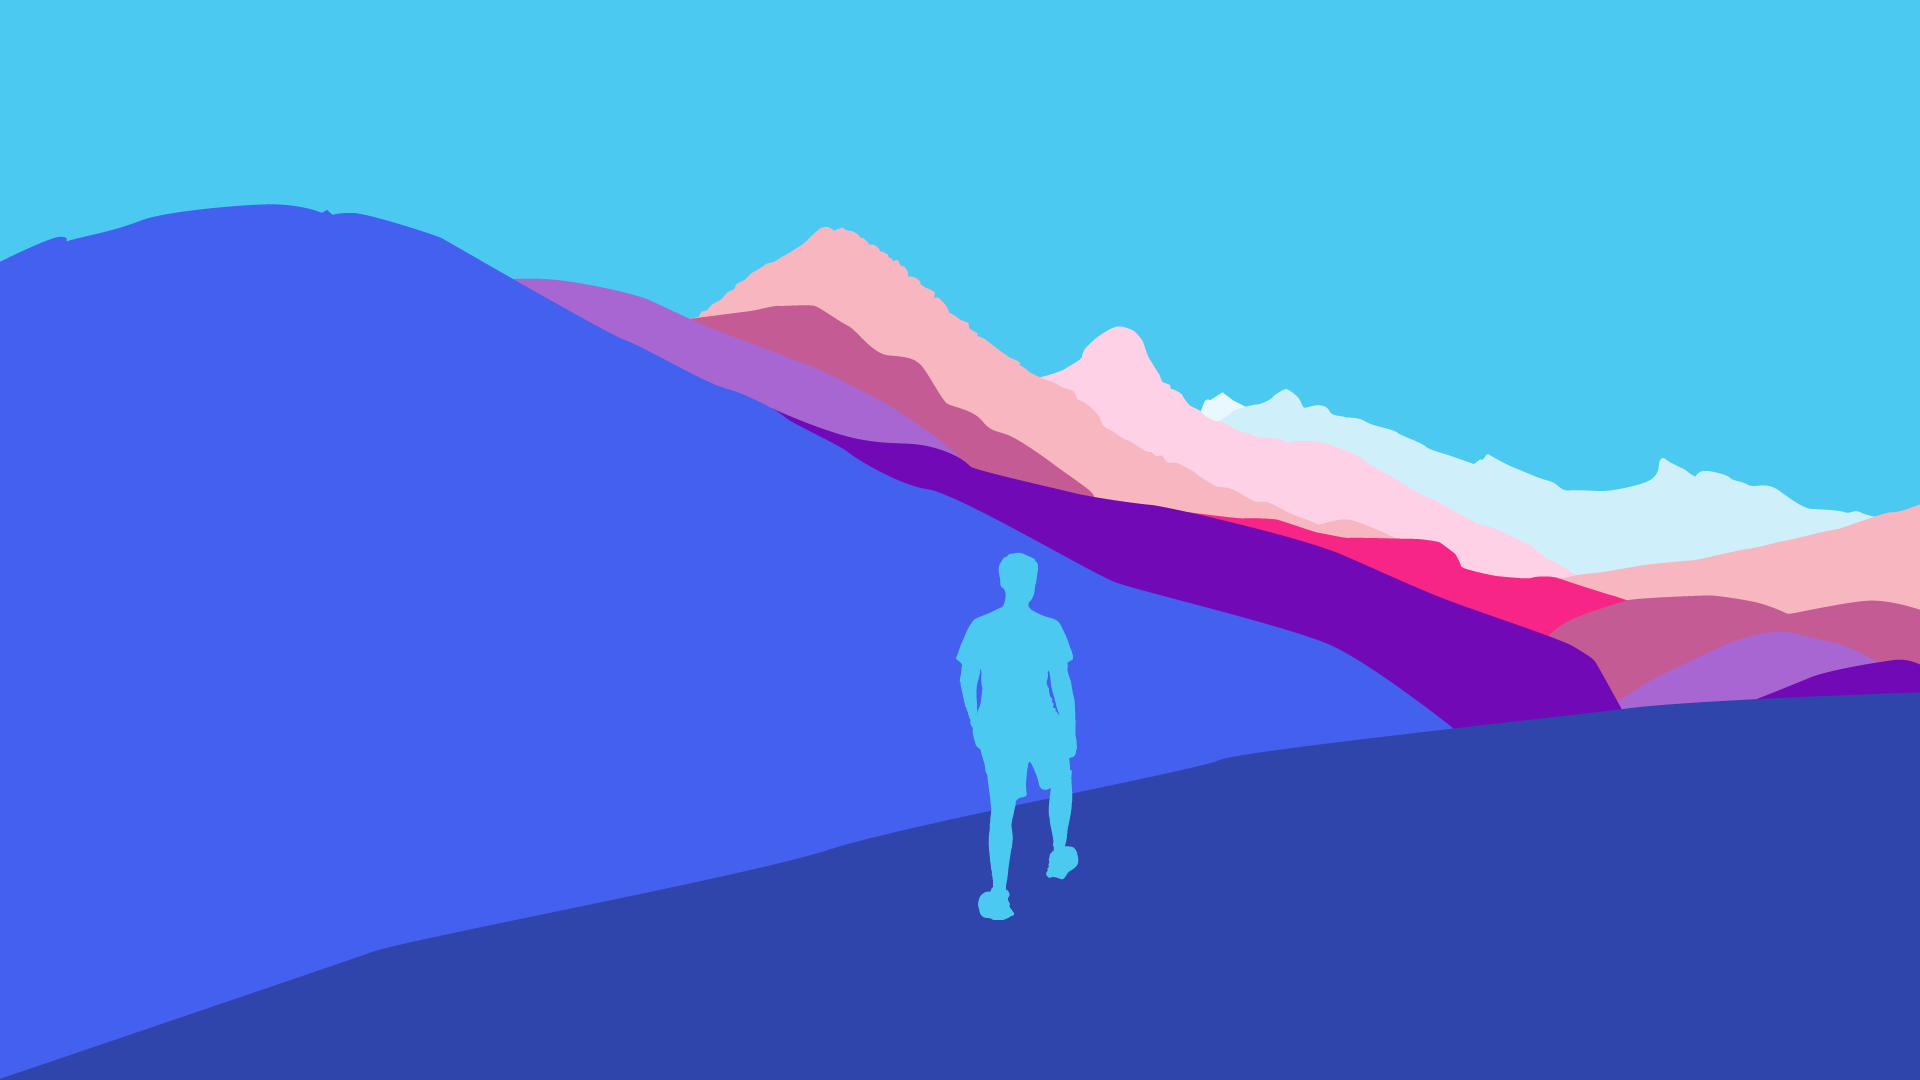 Background photo of a silhouette version of a mountainscape with a man standing on it.